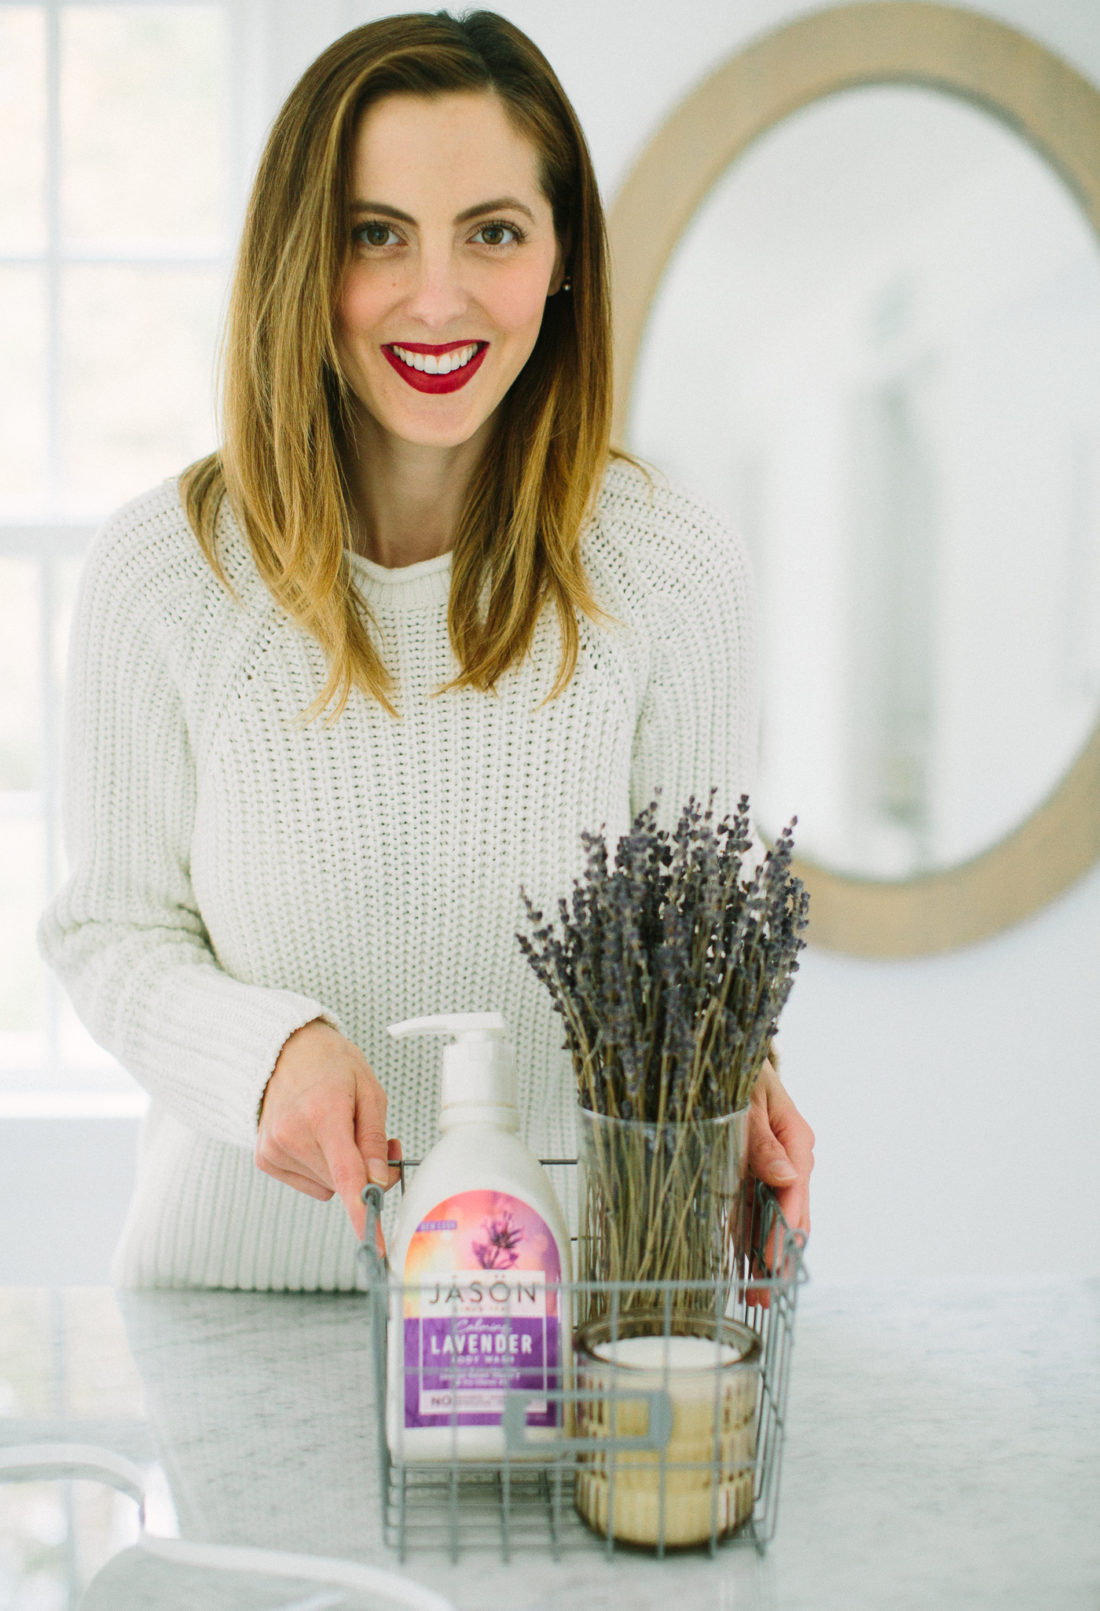 Eva Amurri martino is pictured with a collection of lavender goodies for her holiday houseguests